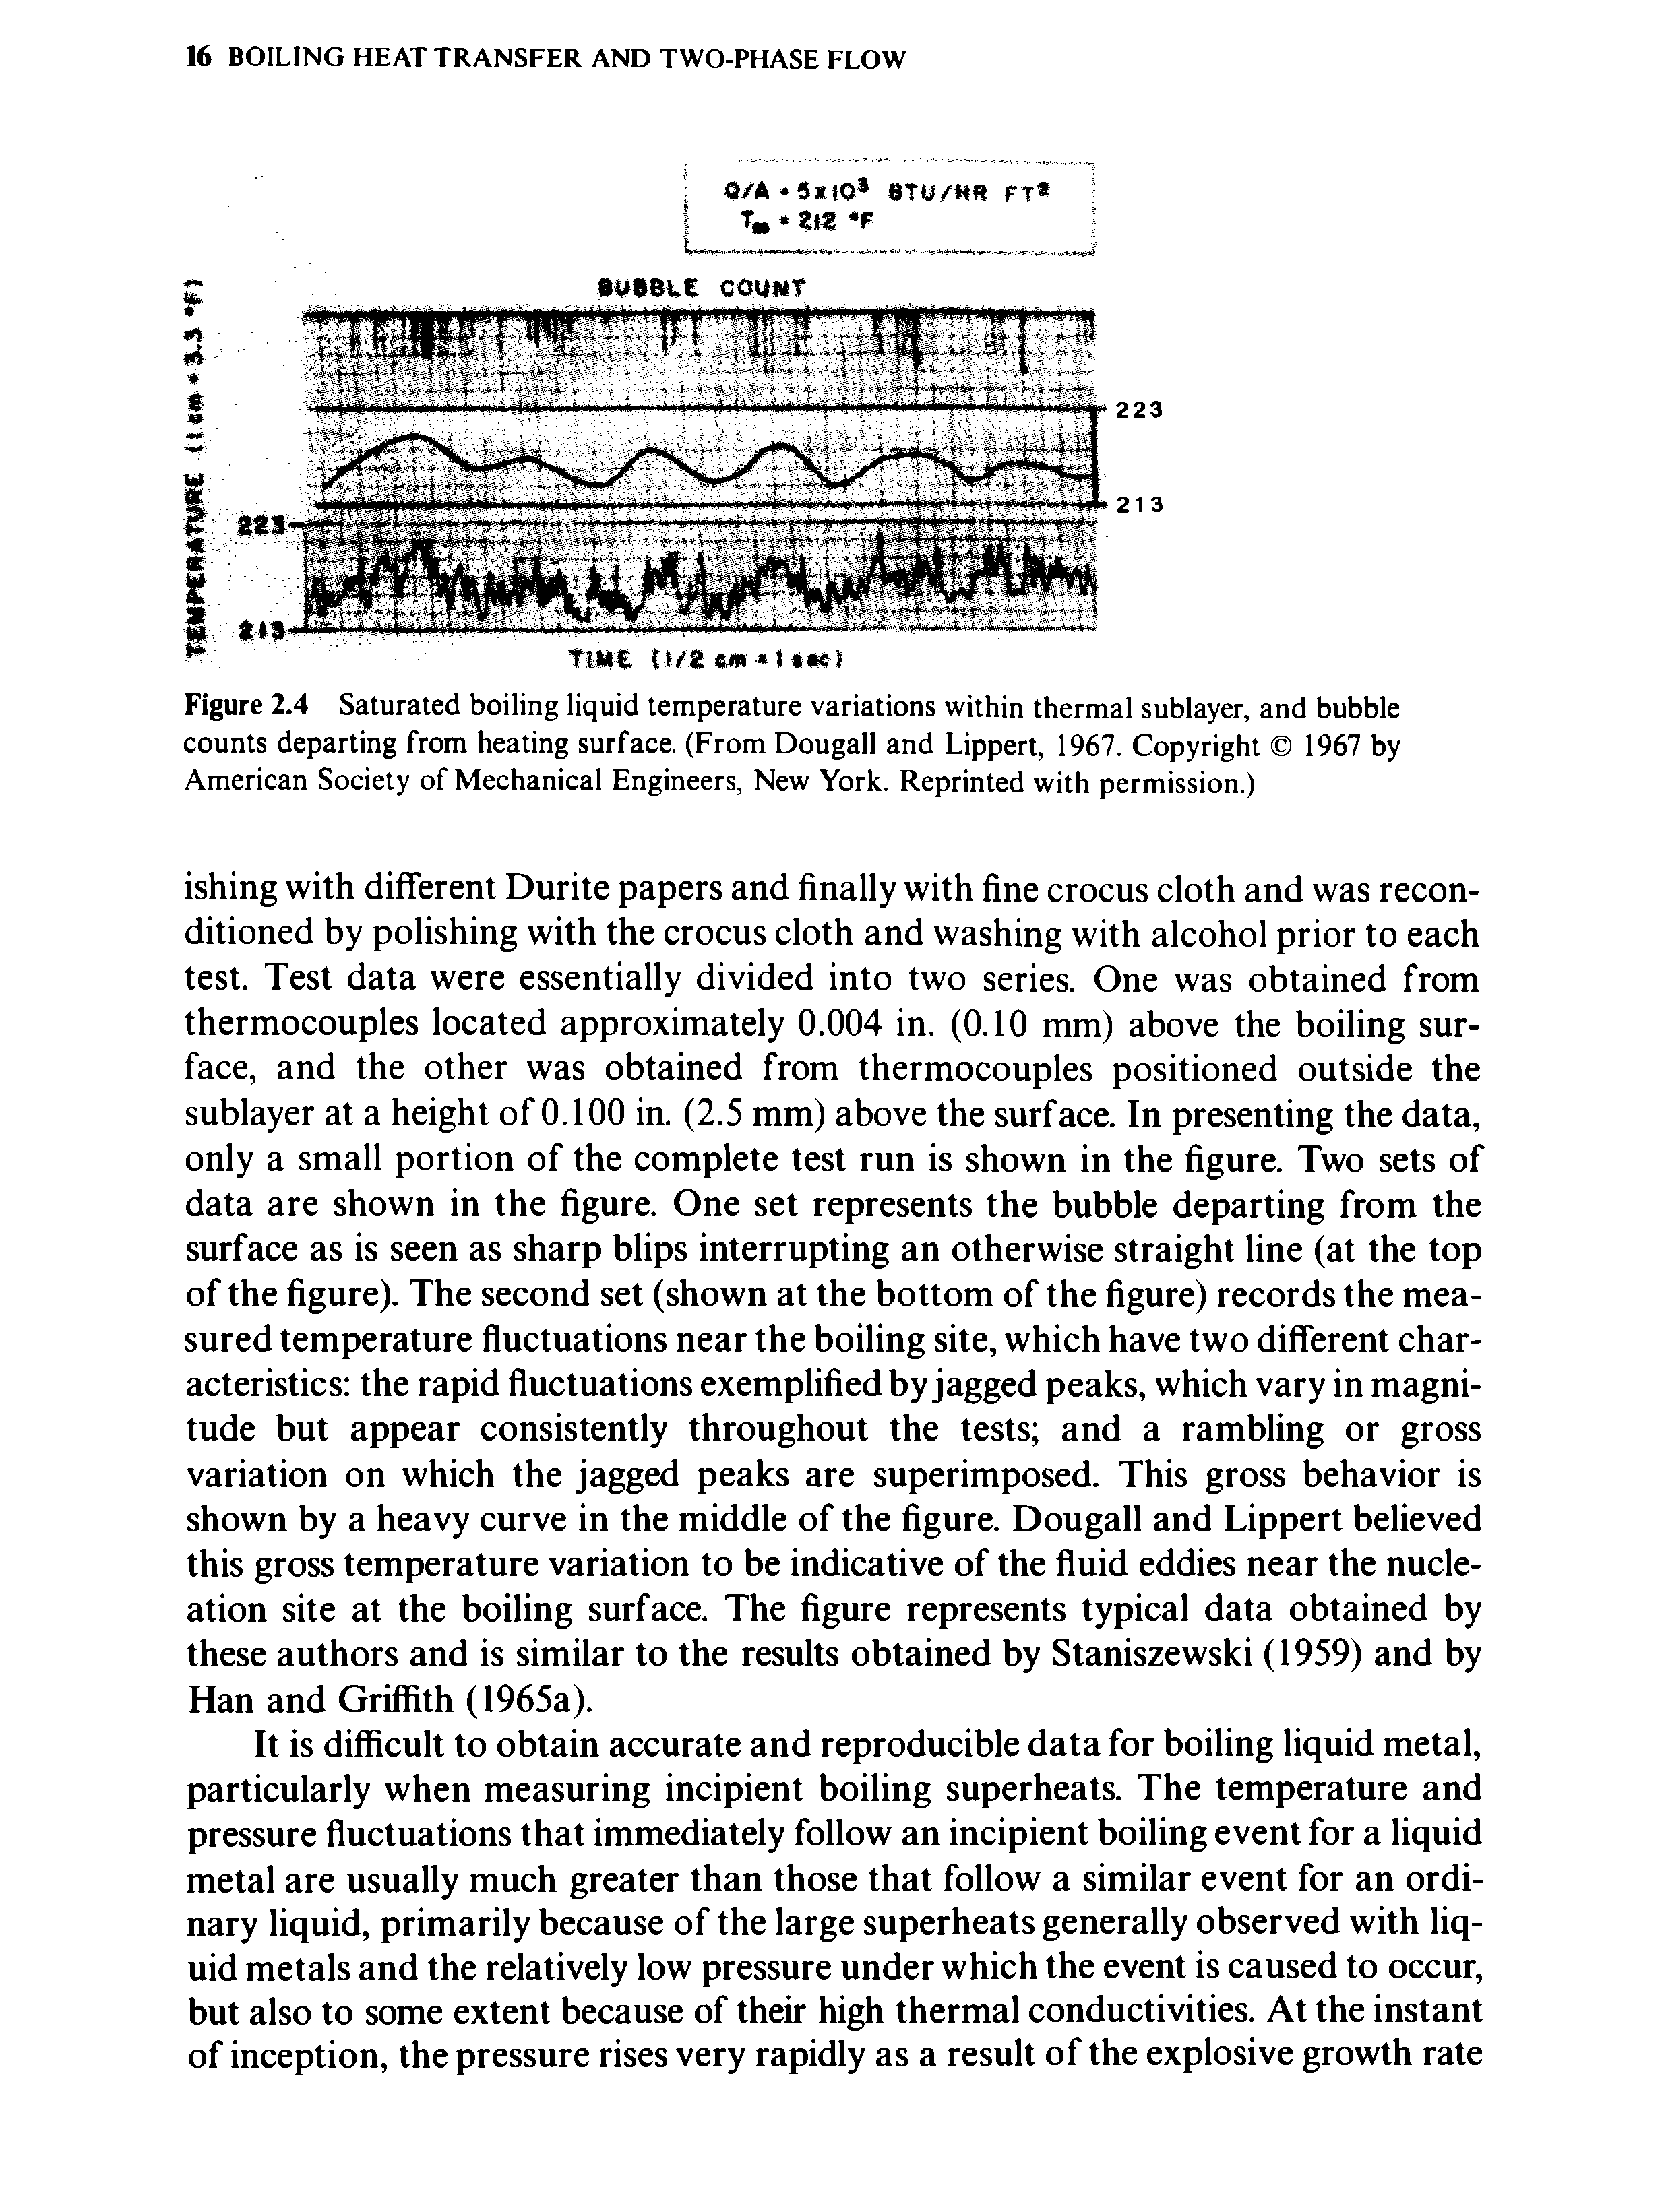 Figure 2.4 Saturated boiling liquid temperature variations within thermal sublayer, and bubble counts departing from heating surface. (From Dougall and Lippert, 1967. Copyright 1967 by American Society of Mechanical Engineers, New York. Reprinted with permission.)...